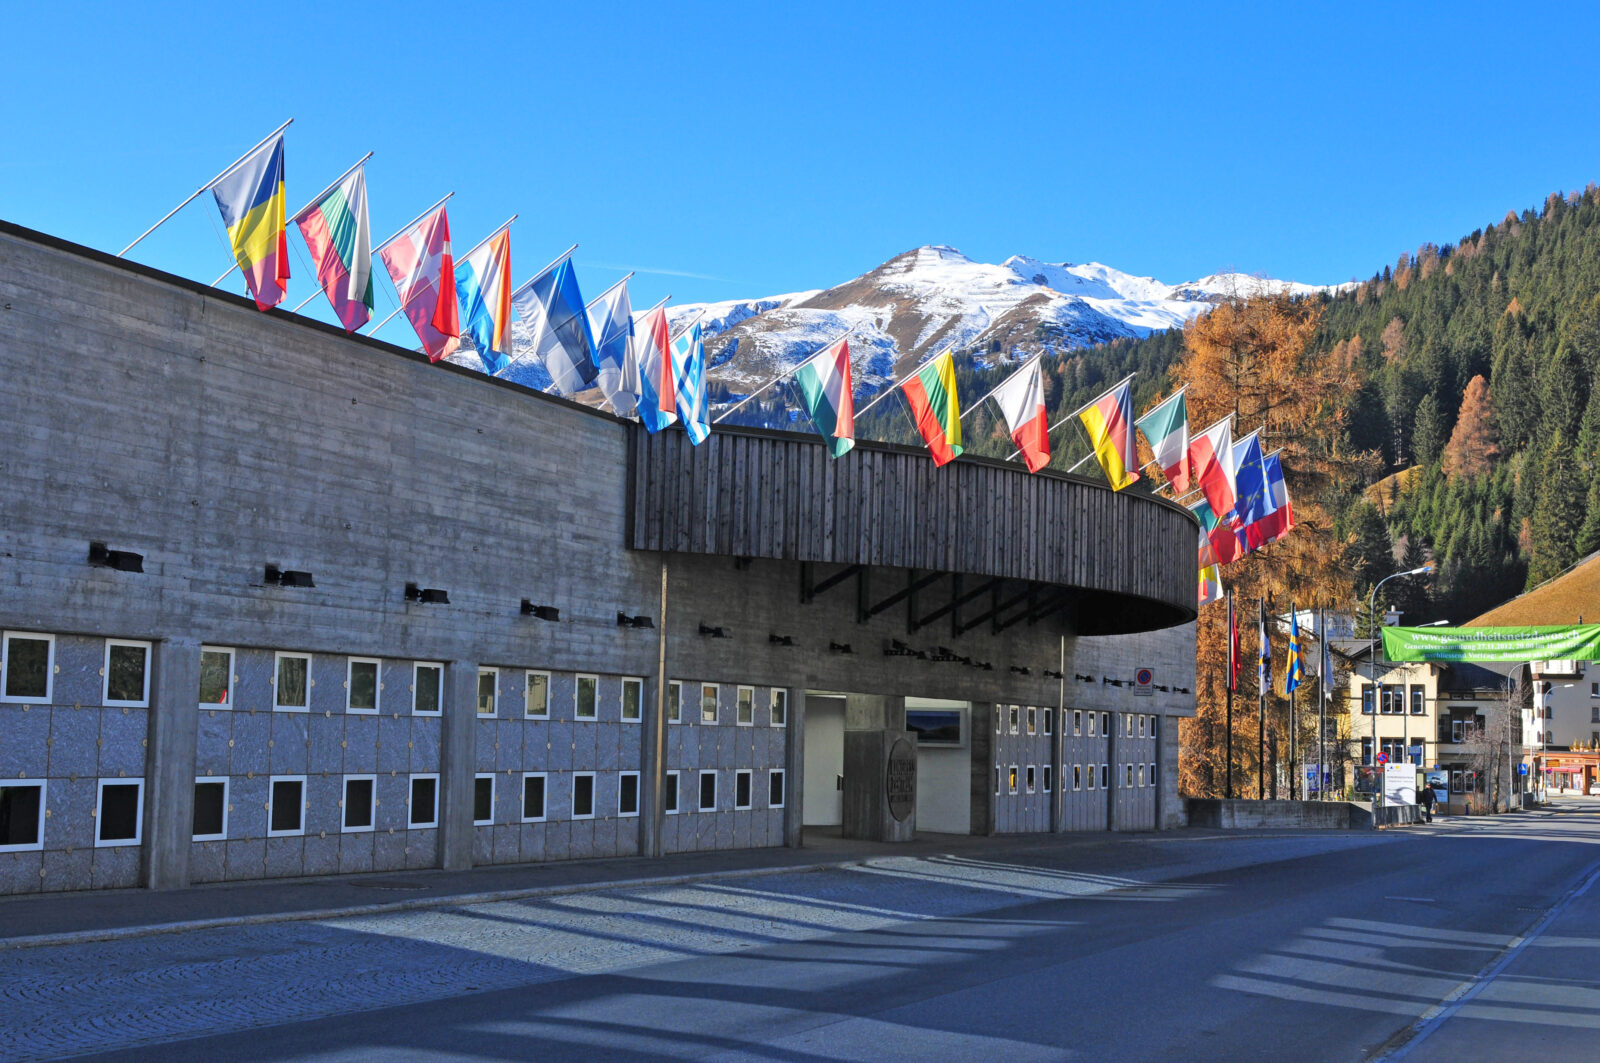 The Congress Center of Davos, Europe's highest city in the Swiss Alps